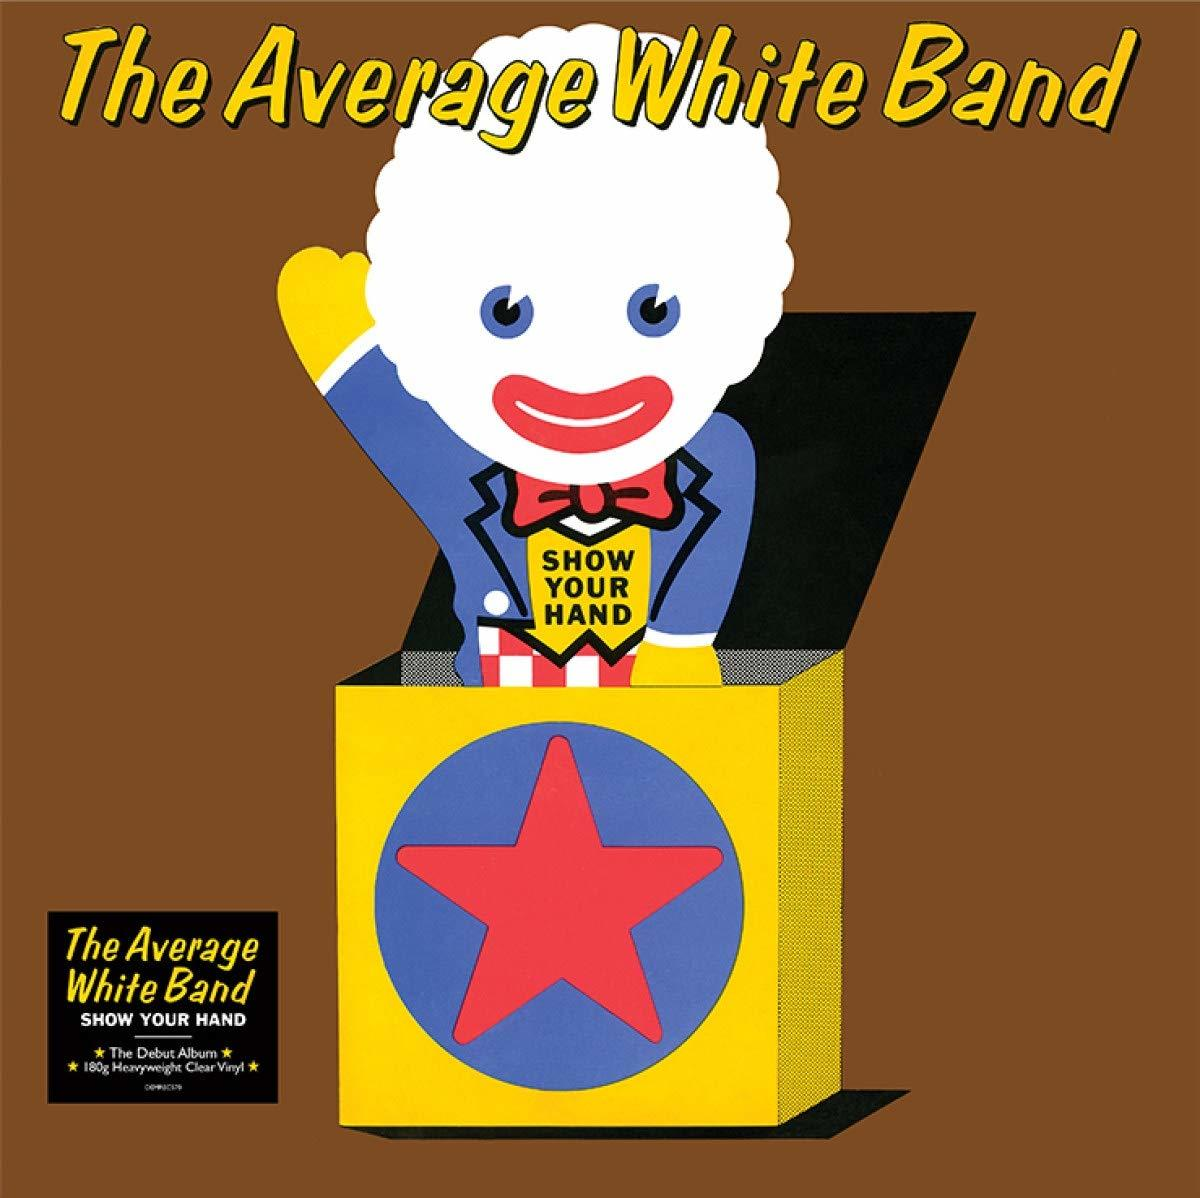 Vinyl) - Gr.Clear The Hand Show (Vinyl) (180 Average White - Your Band